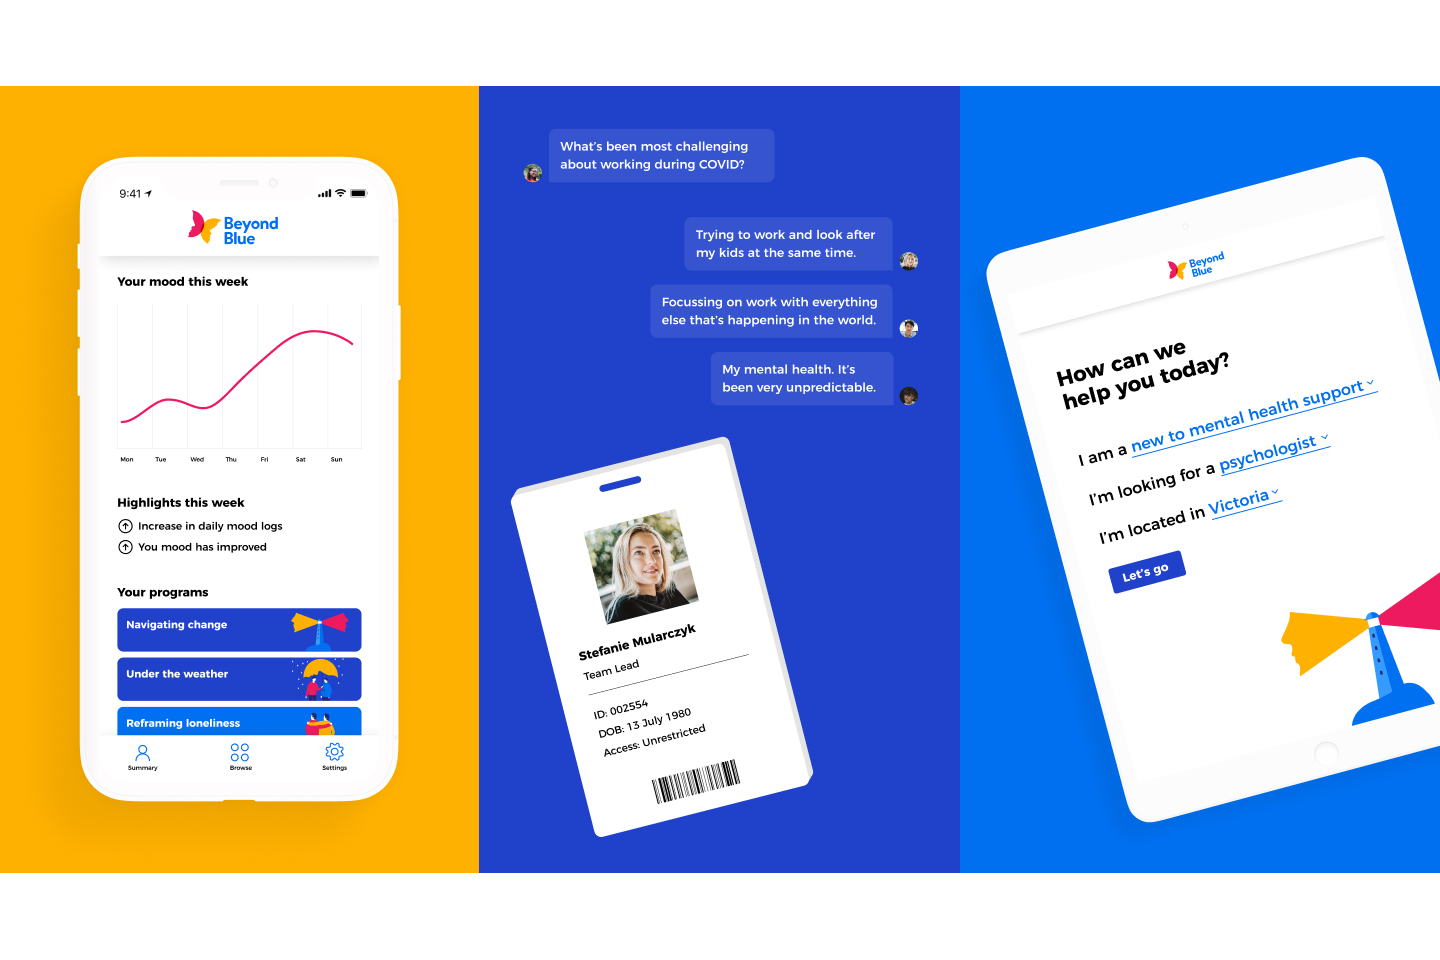 A visual of a concept designed as part of the project - showing an app interface that helps people track their progress and access the support they need.